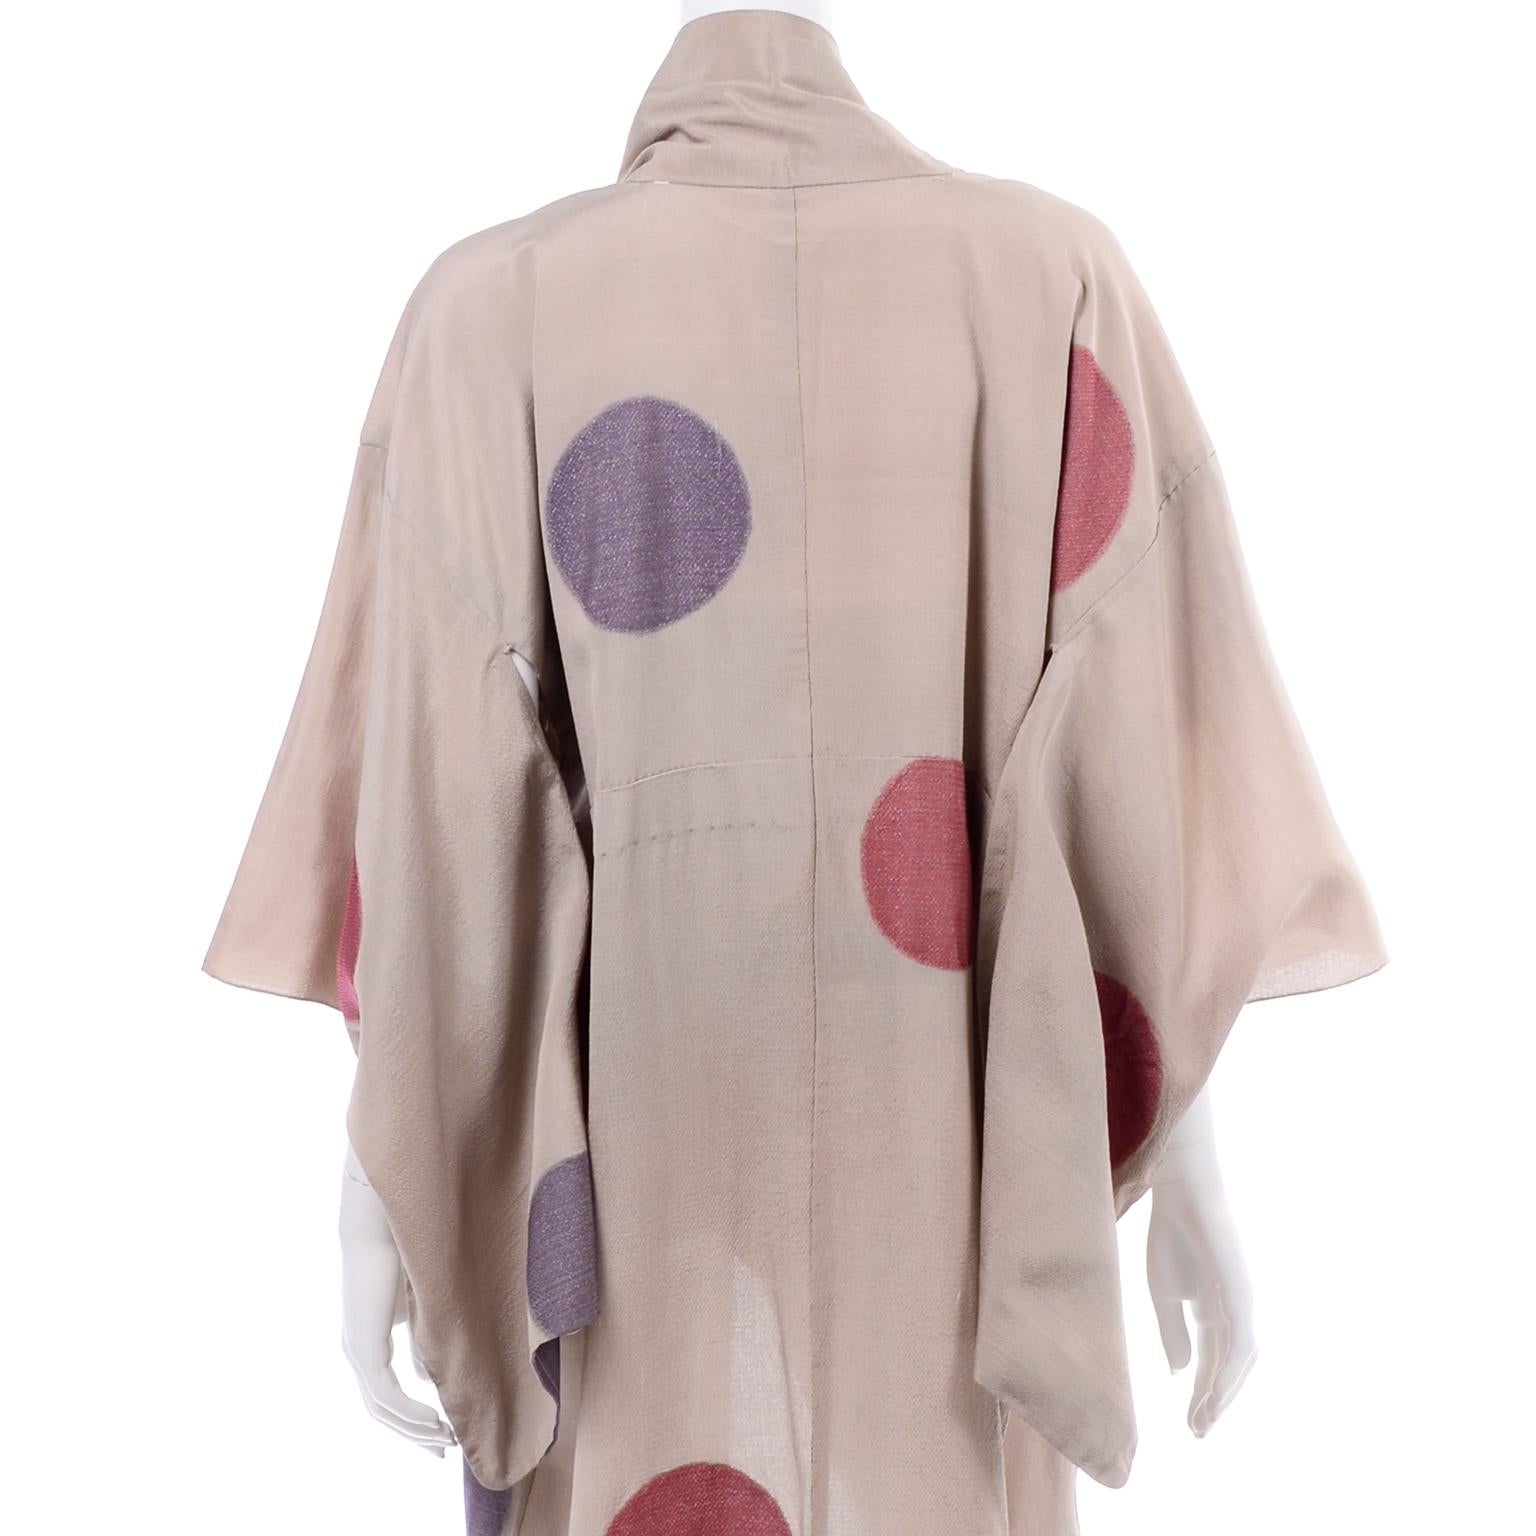 Vintage Tan Kimono With Purple and Red Lamé Circles Dots & Pink Lining In Good Condition For Sale In Portland, OR